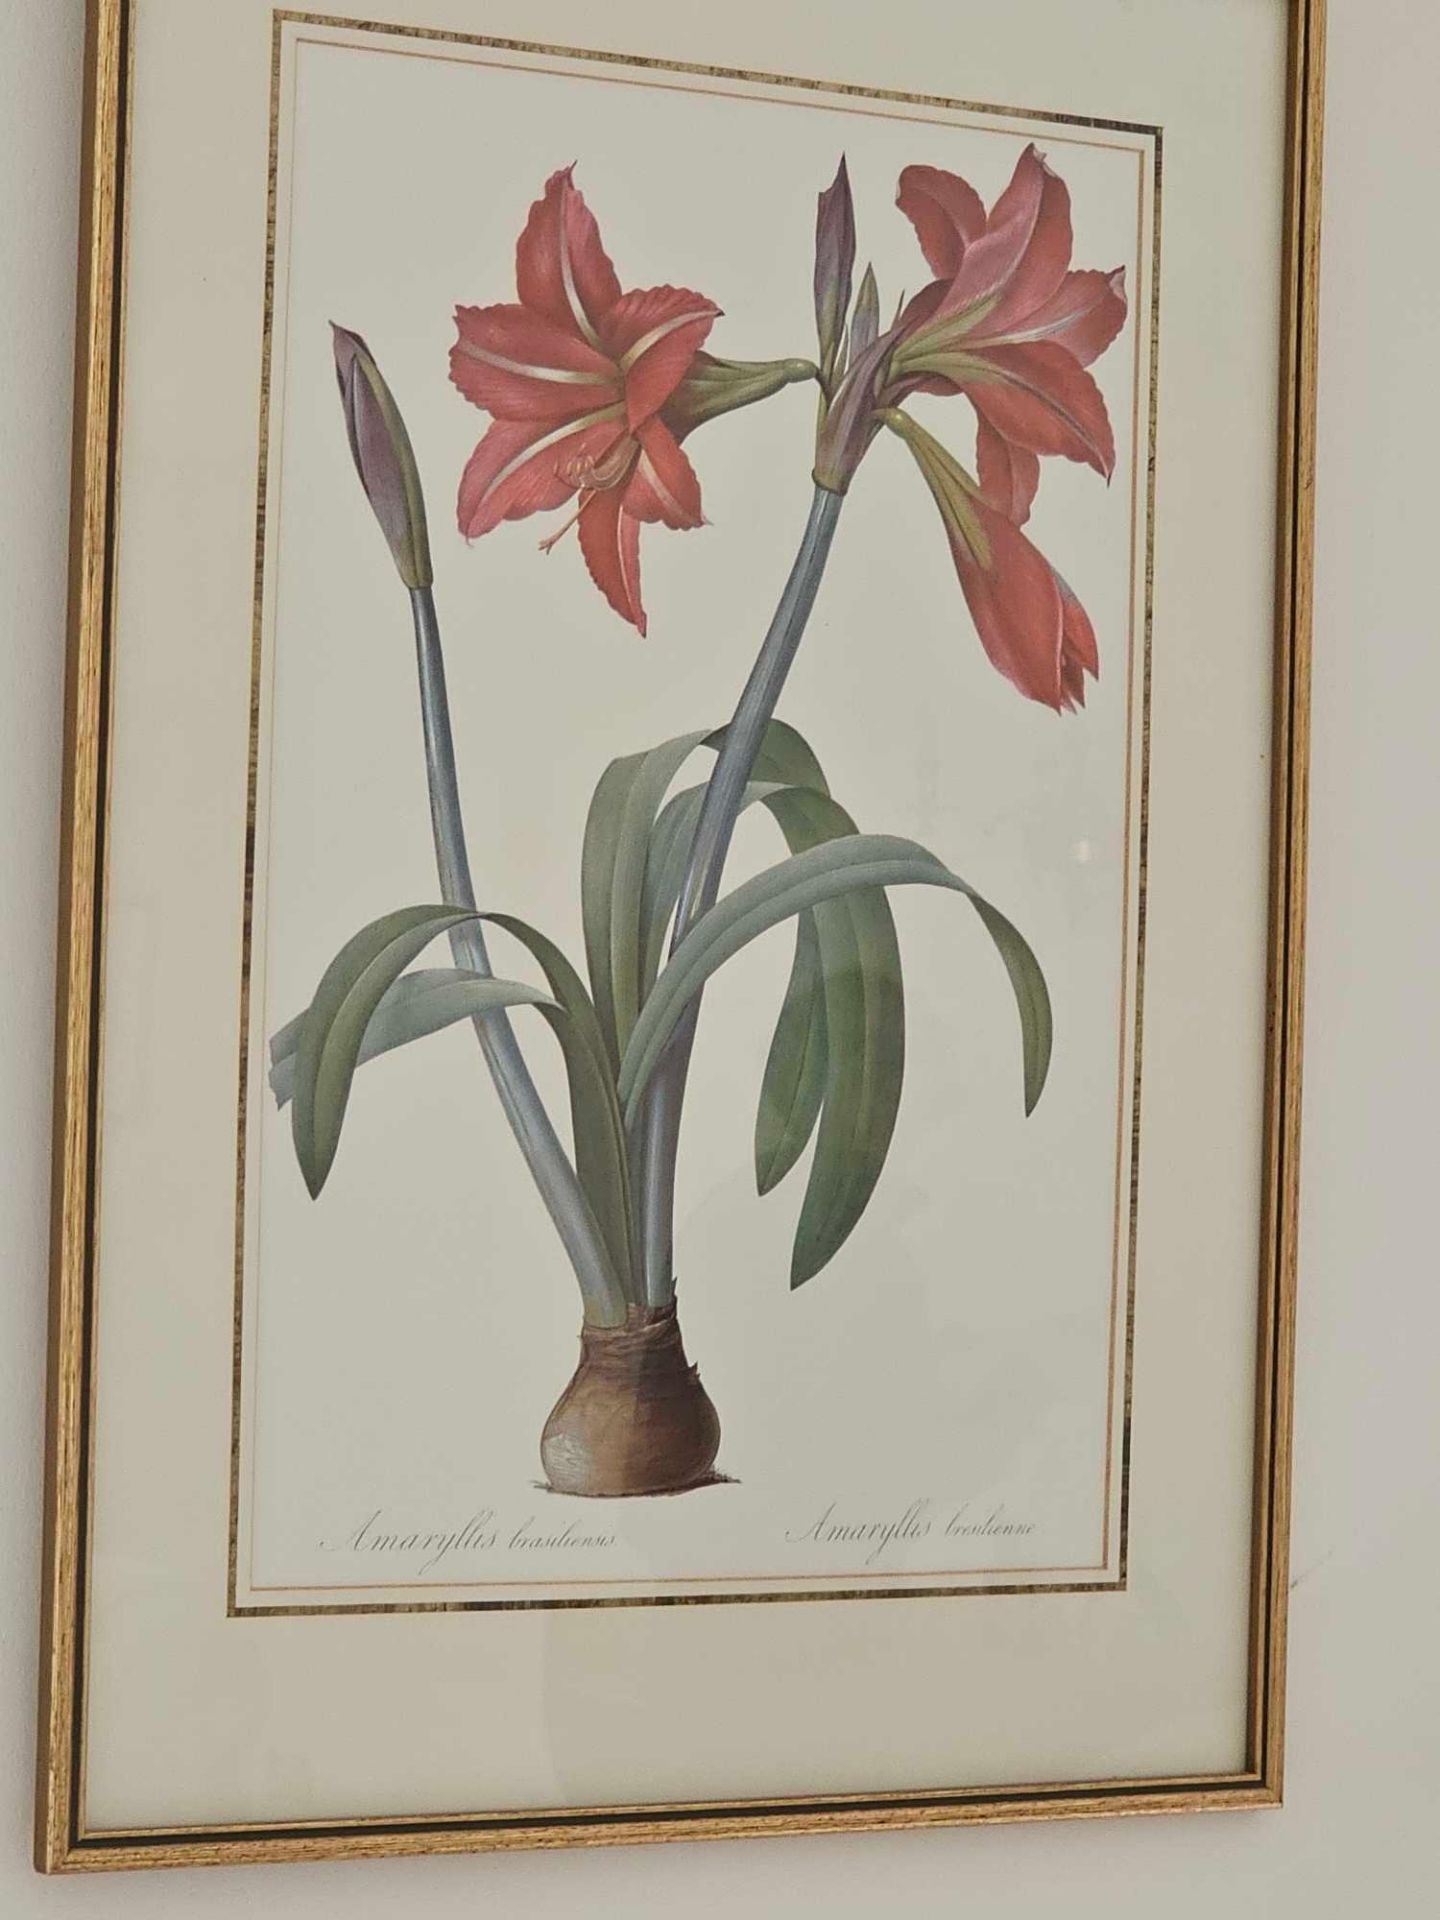 Lithograph Of Amaryllis Brasiliensis By Pierre Joseph Celestin RedoutÃ© From P. J. RedoutÃ©'s - Image 2 of 3